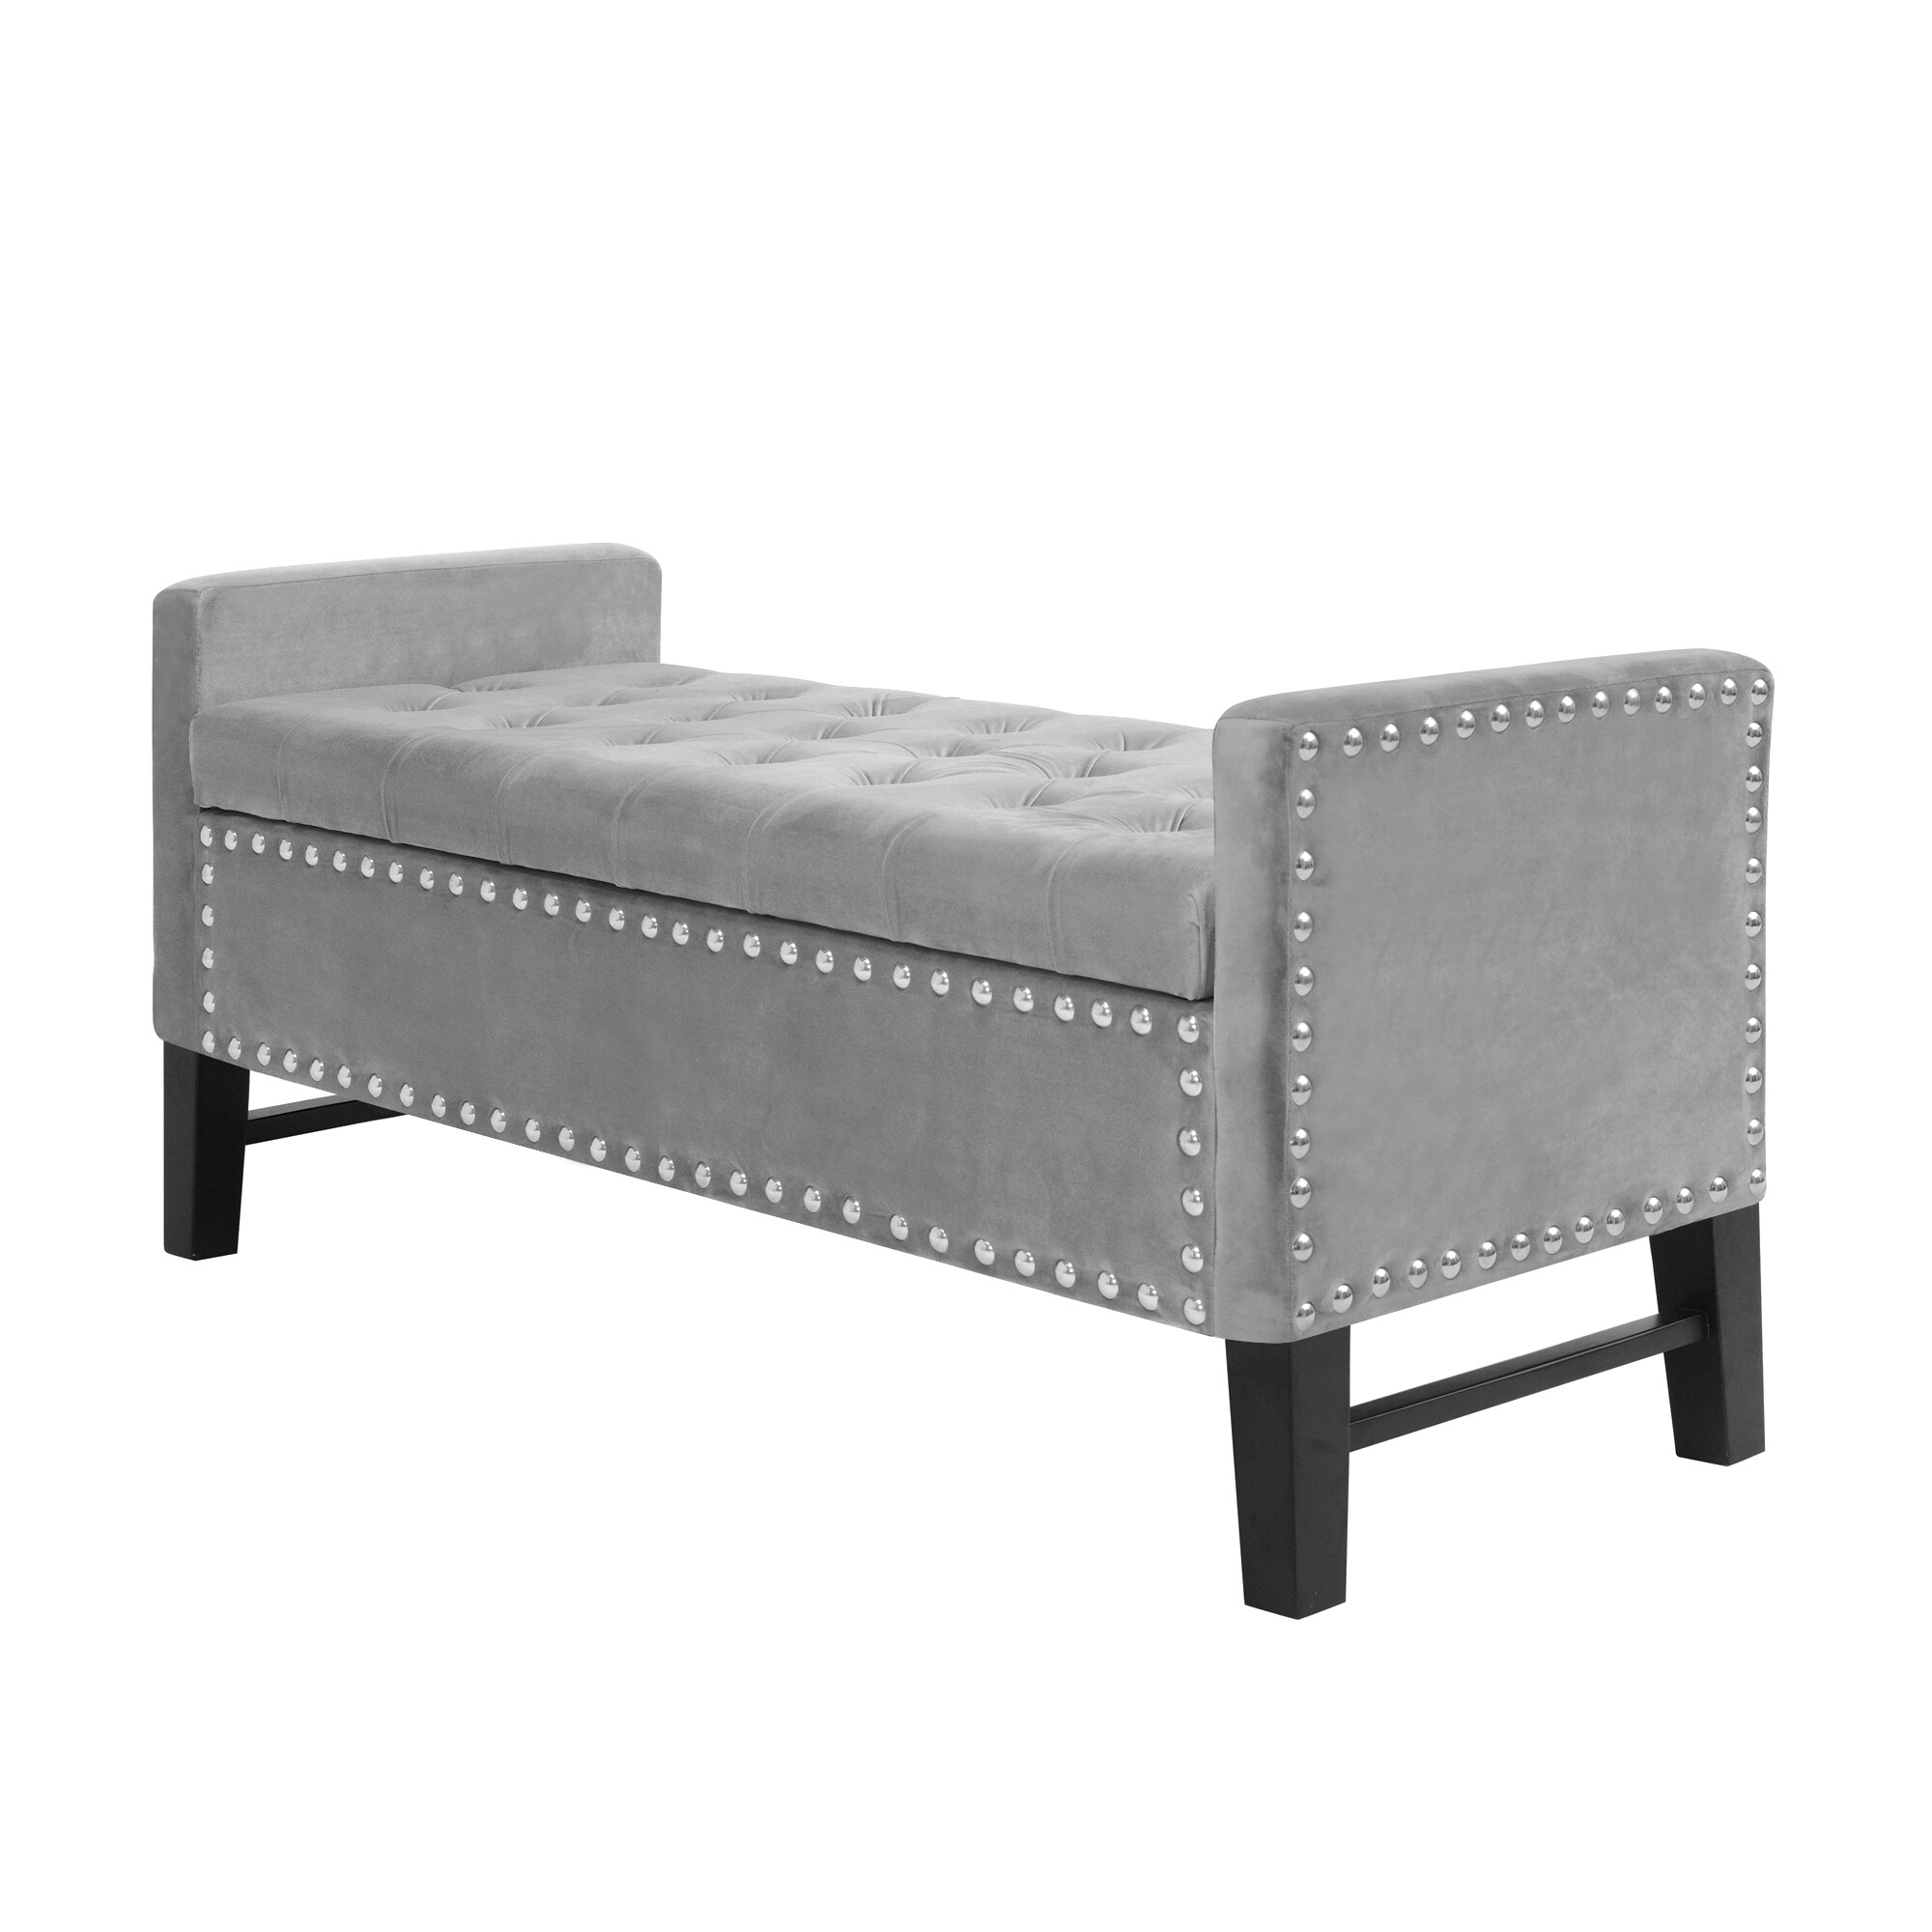 Inspired Home Emmaline 22.05-in Bench Modern Benches Light in Storage the Storage 50-in department x with Grey at